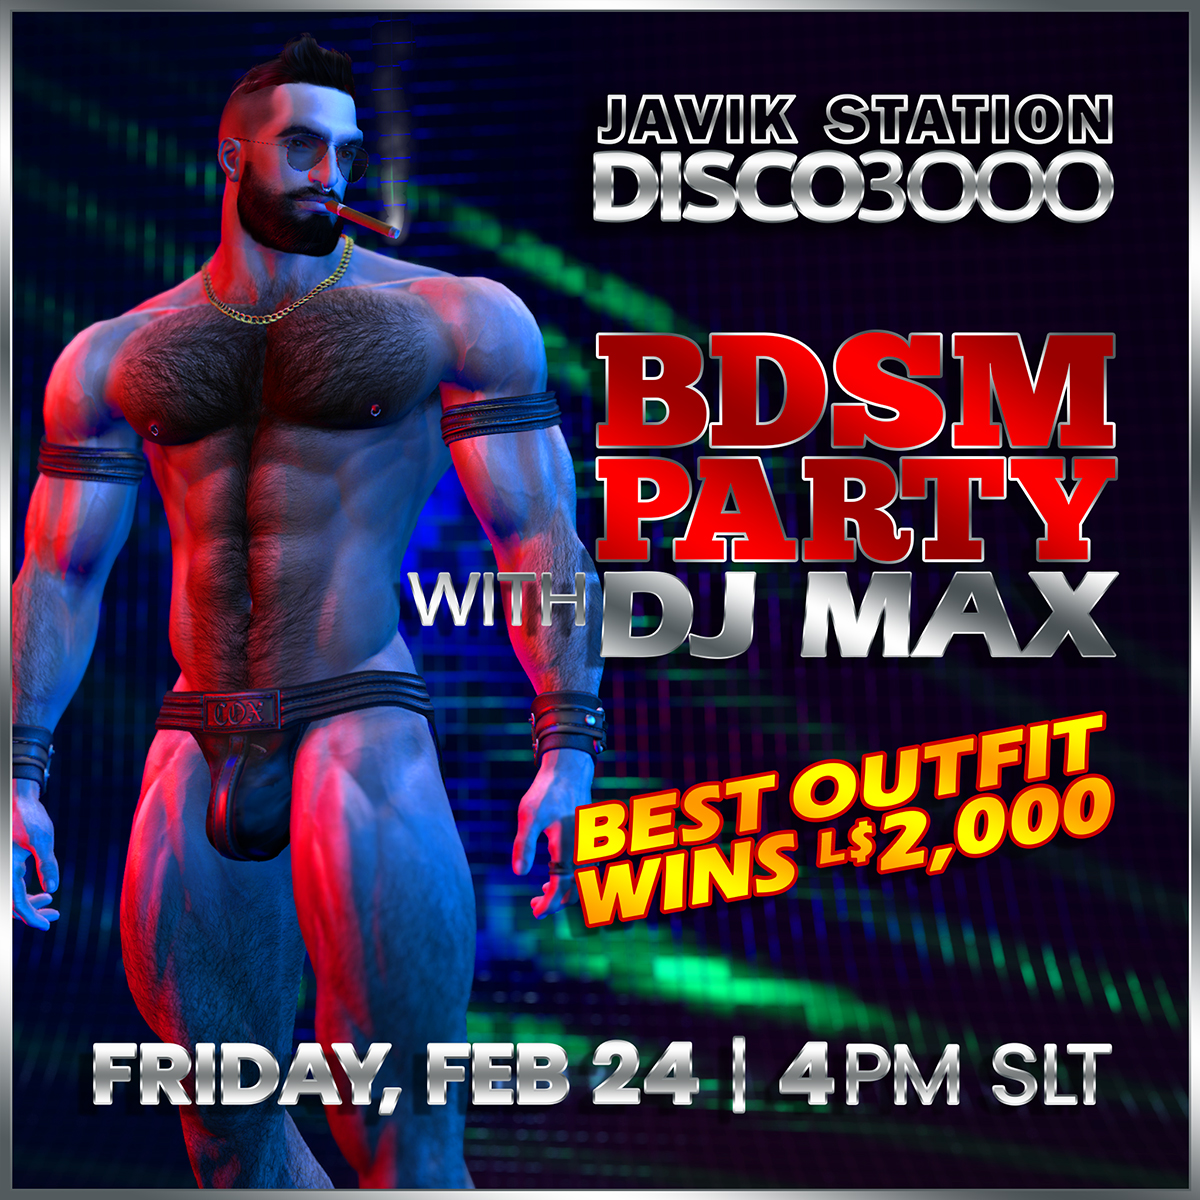 DISCO 3000 BDSM PARTY with DJ MAX!